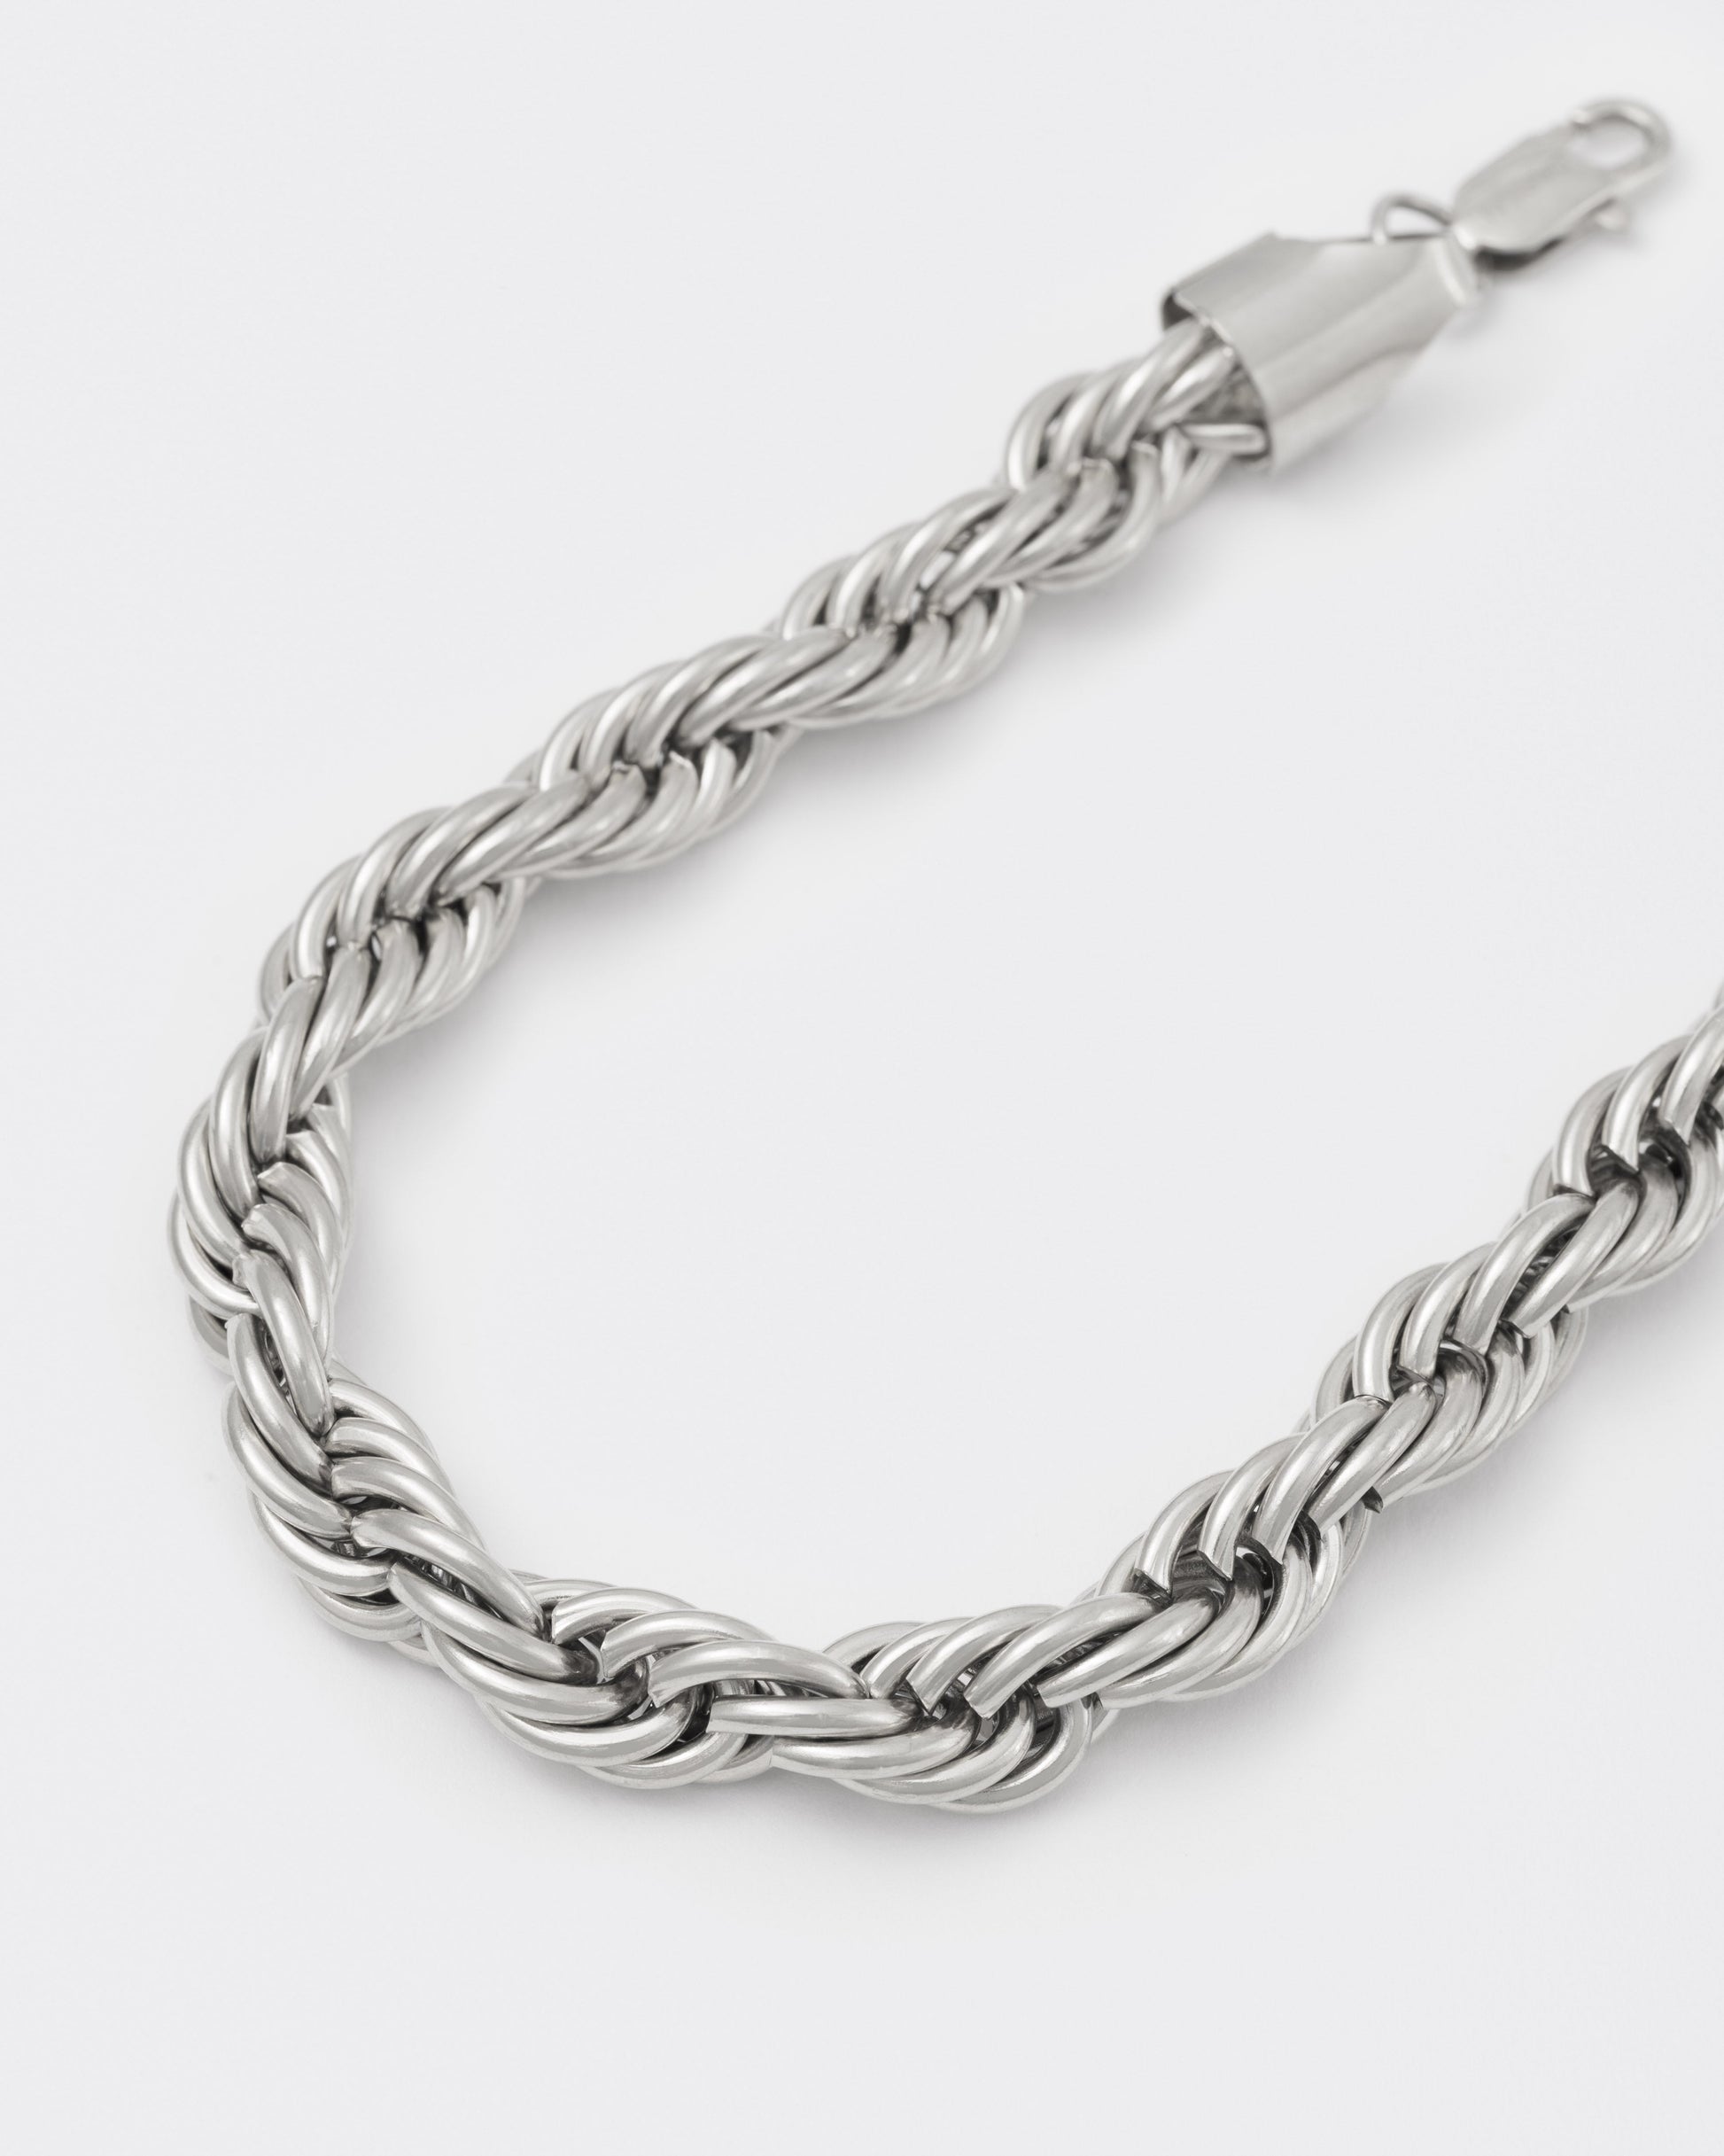 detail of 18k white gold coated 90s-inspired rope chain necklace with lasered logo regular lobster clasp.